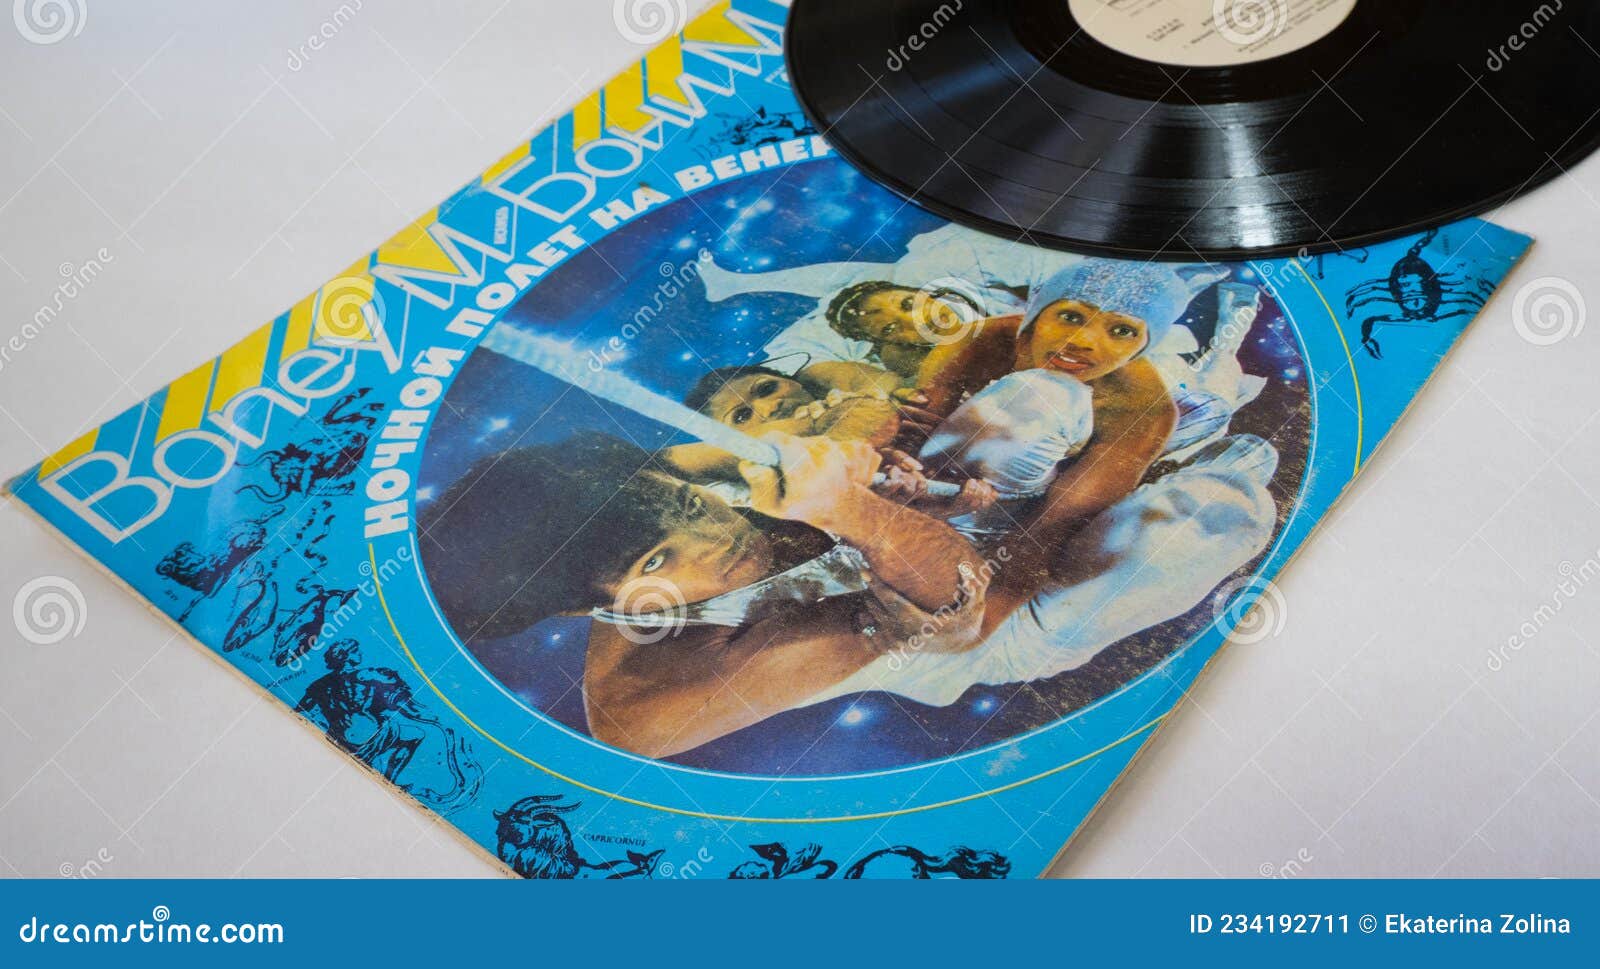 Volgograd, Russia: October 28, 2021: Western Disco Band, Boney M Music Album on Vinyl Record. Title: Cover Editorial Photo - Image of memories, collection: 234192711